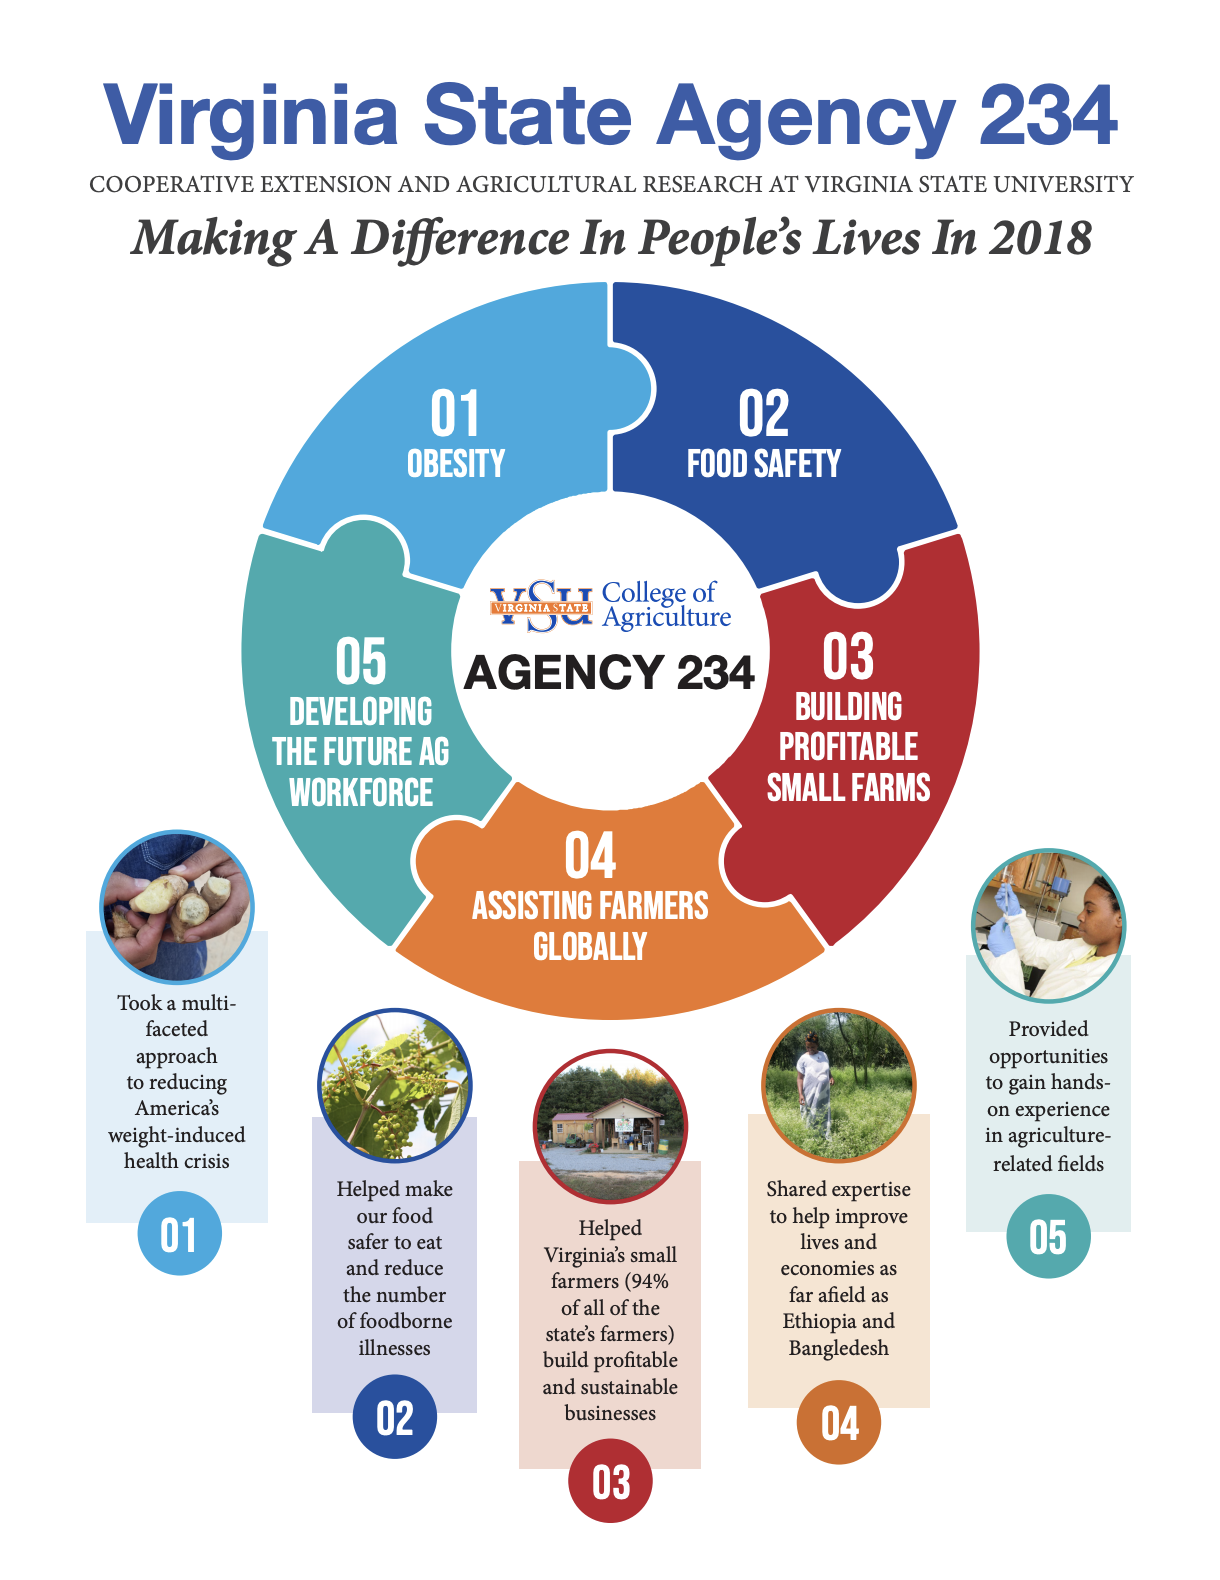 About Agency 234